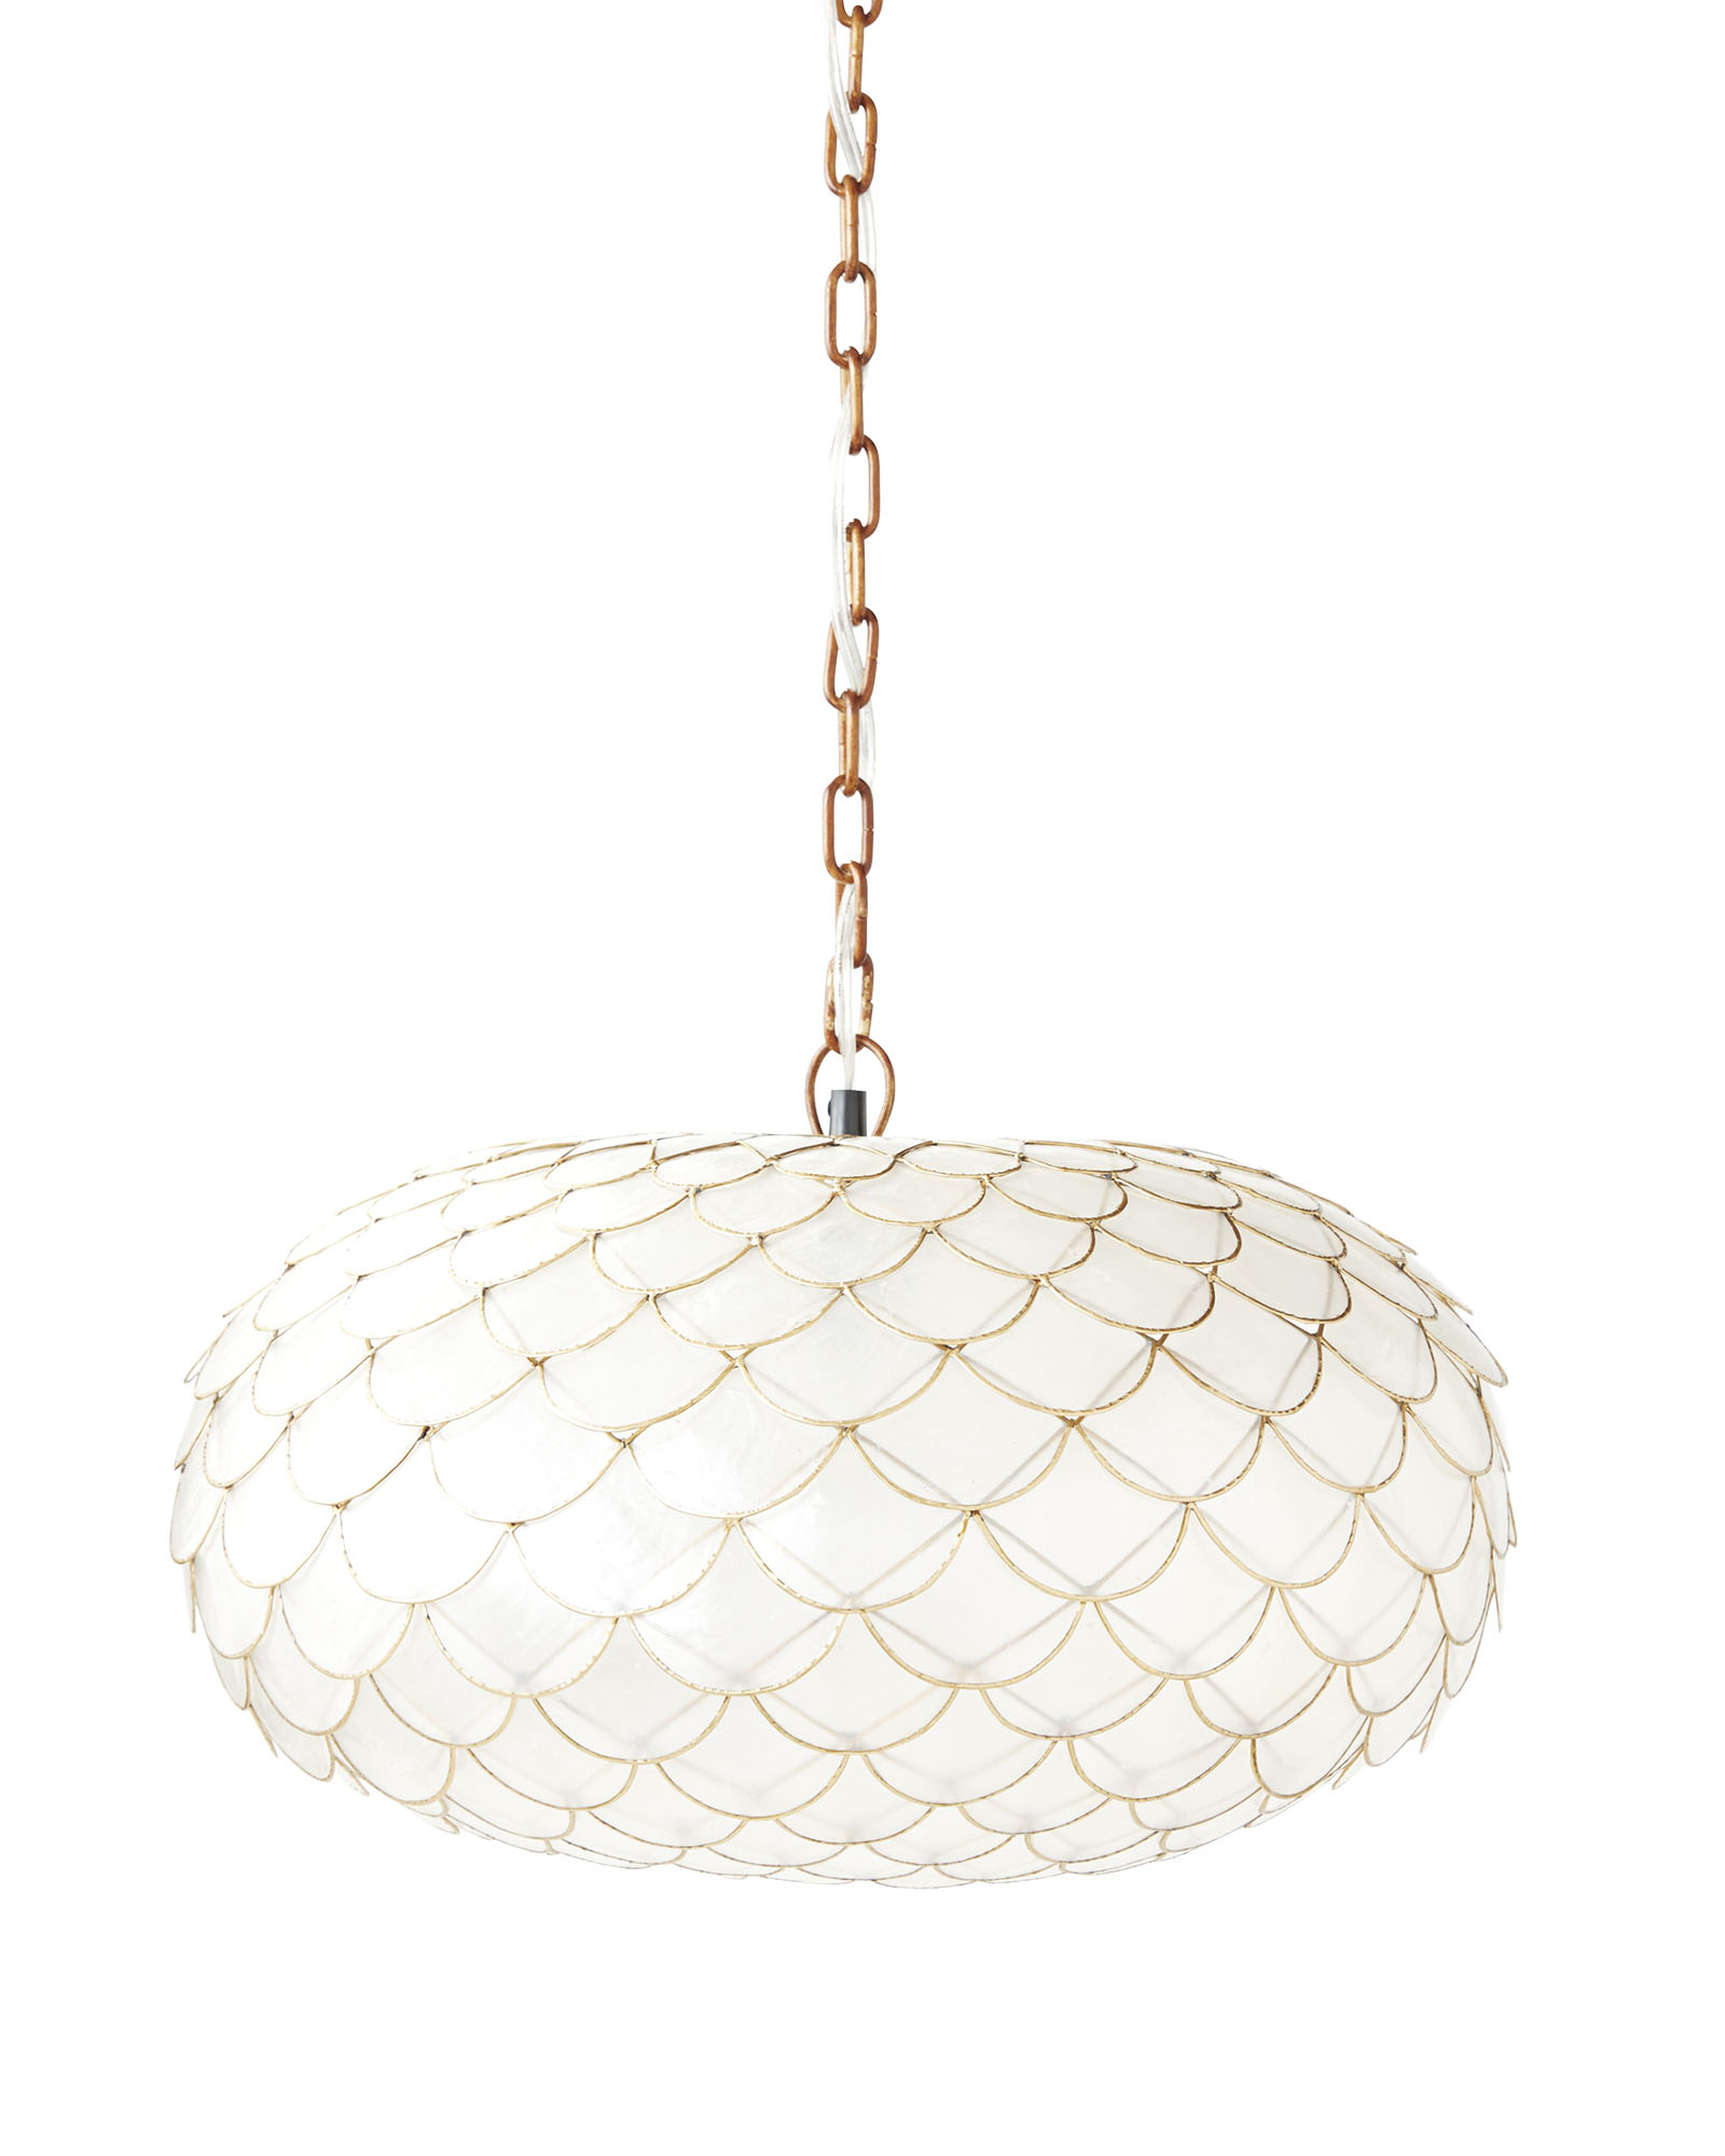 Capiz Scalloped Chandelier - Serena and Lily